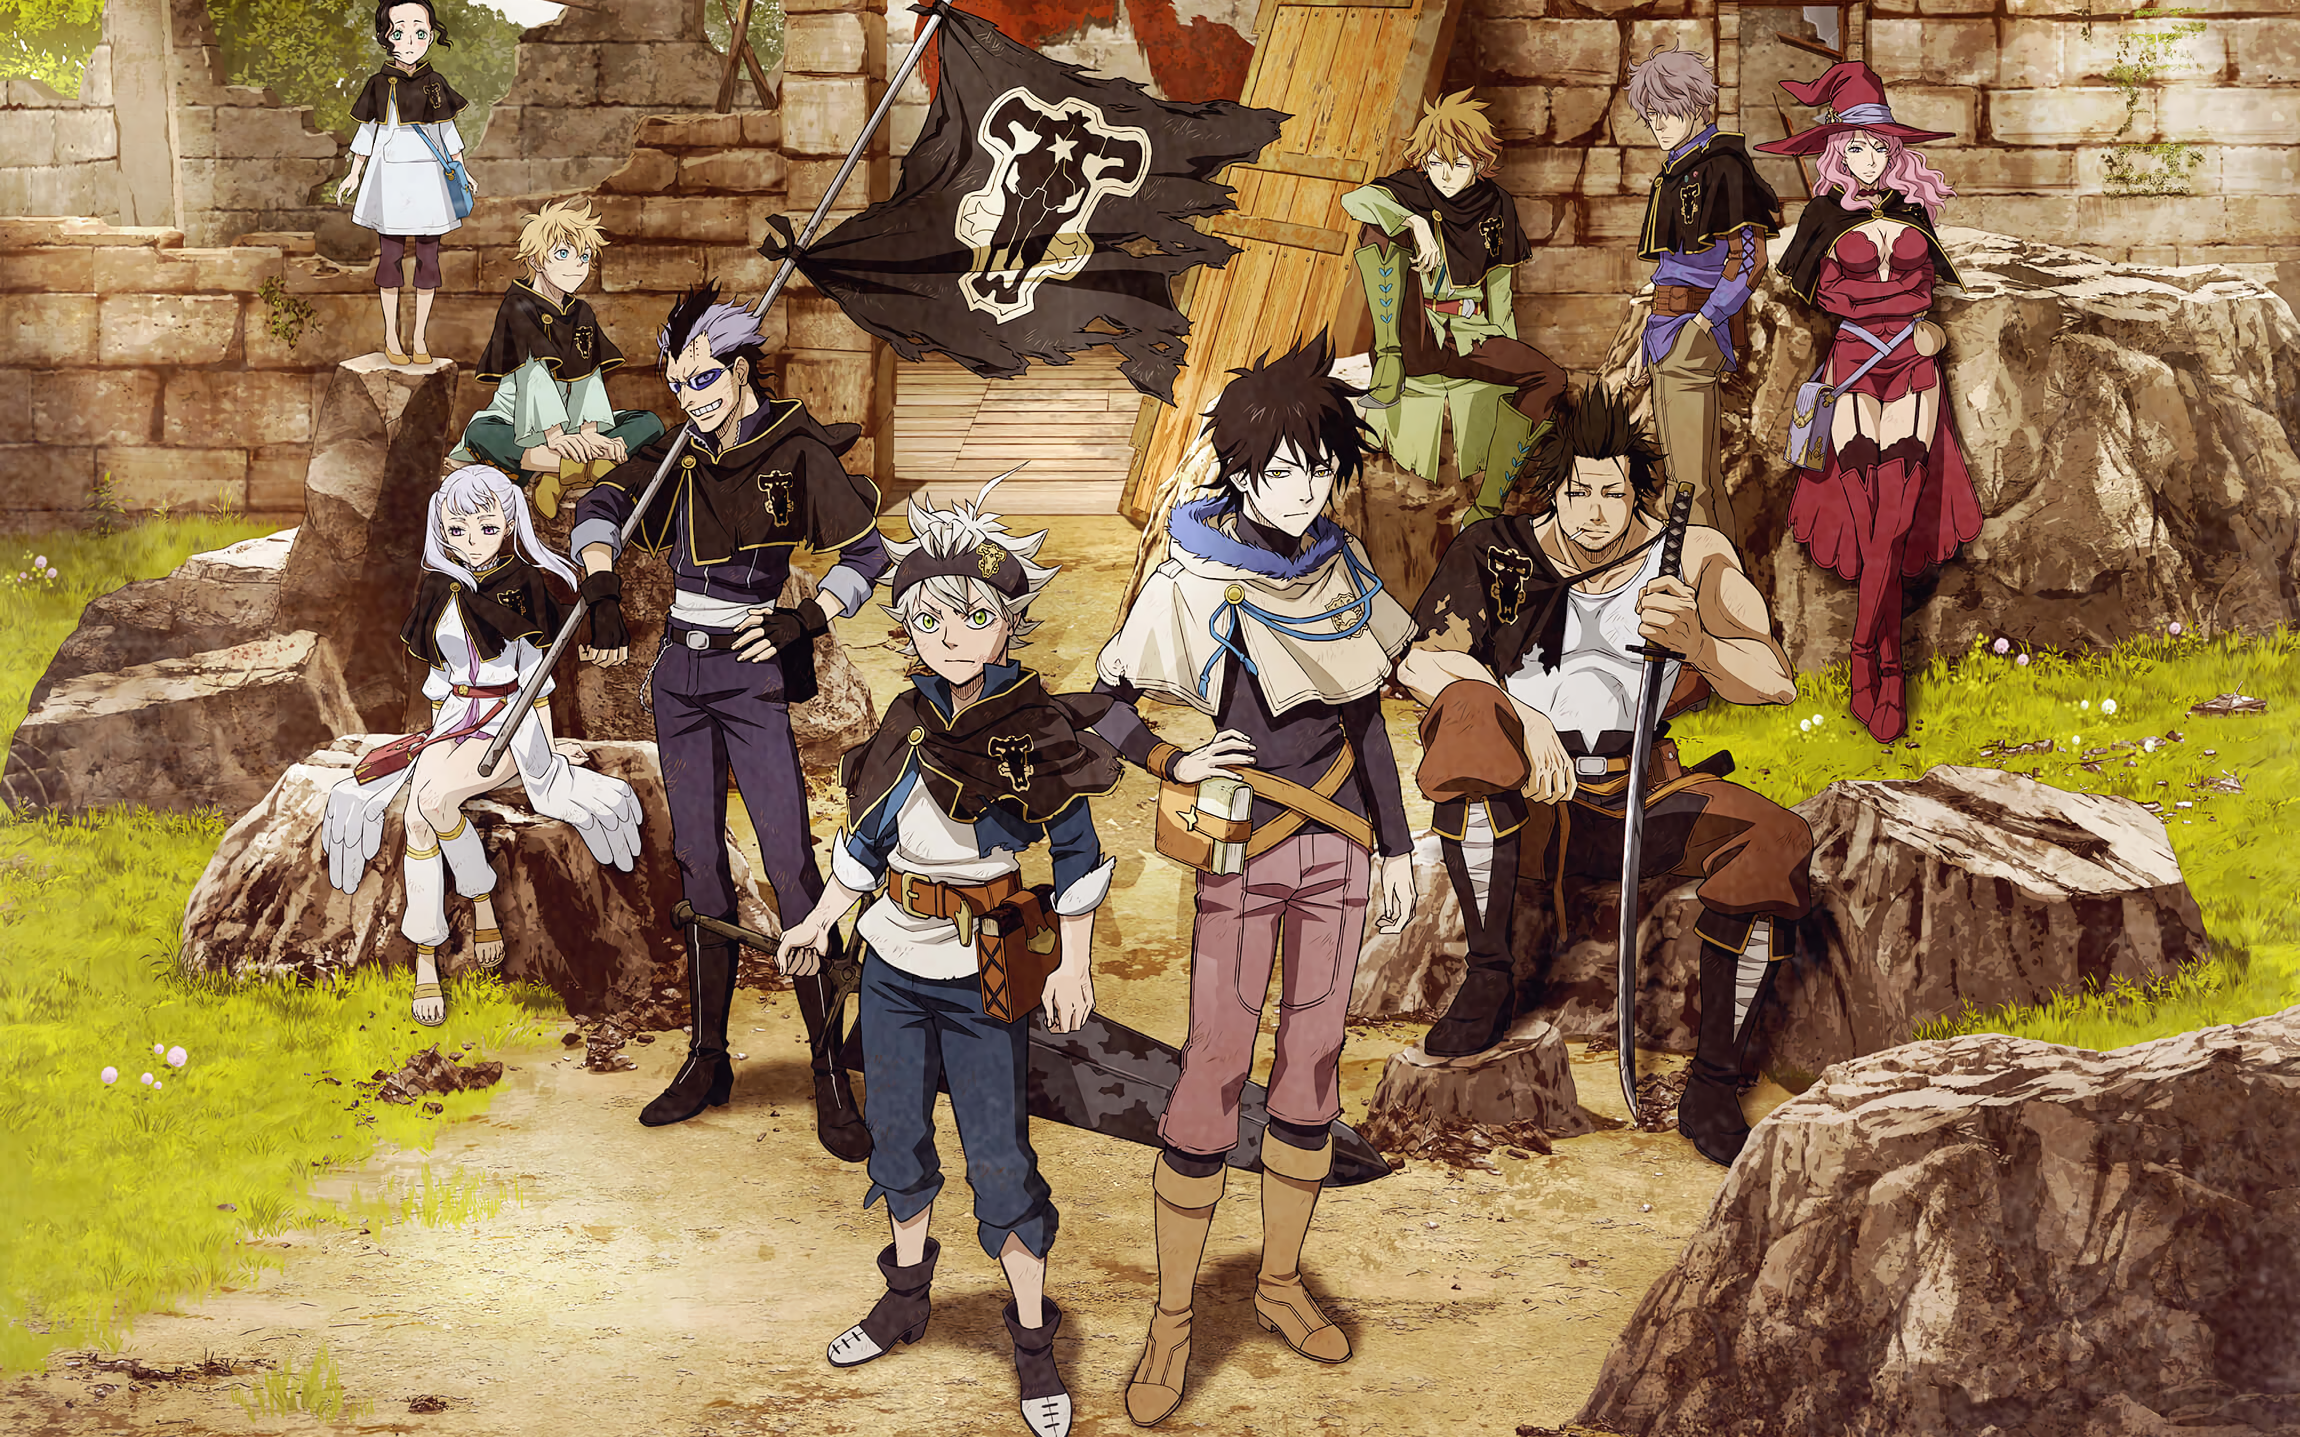 Asta Black Clover Charmy Pappitson Finral Roulacase Gauche Adlai Luck Voltia Magna Swing Noelle Silv 2300x1437